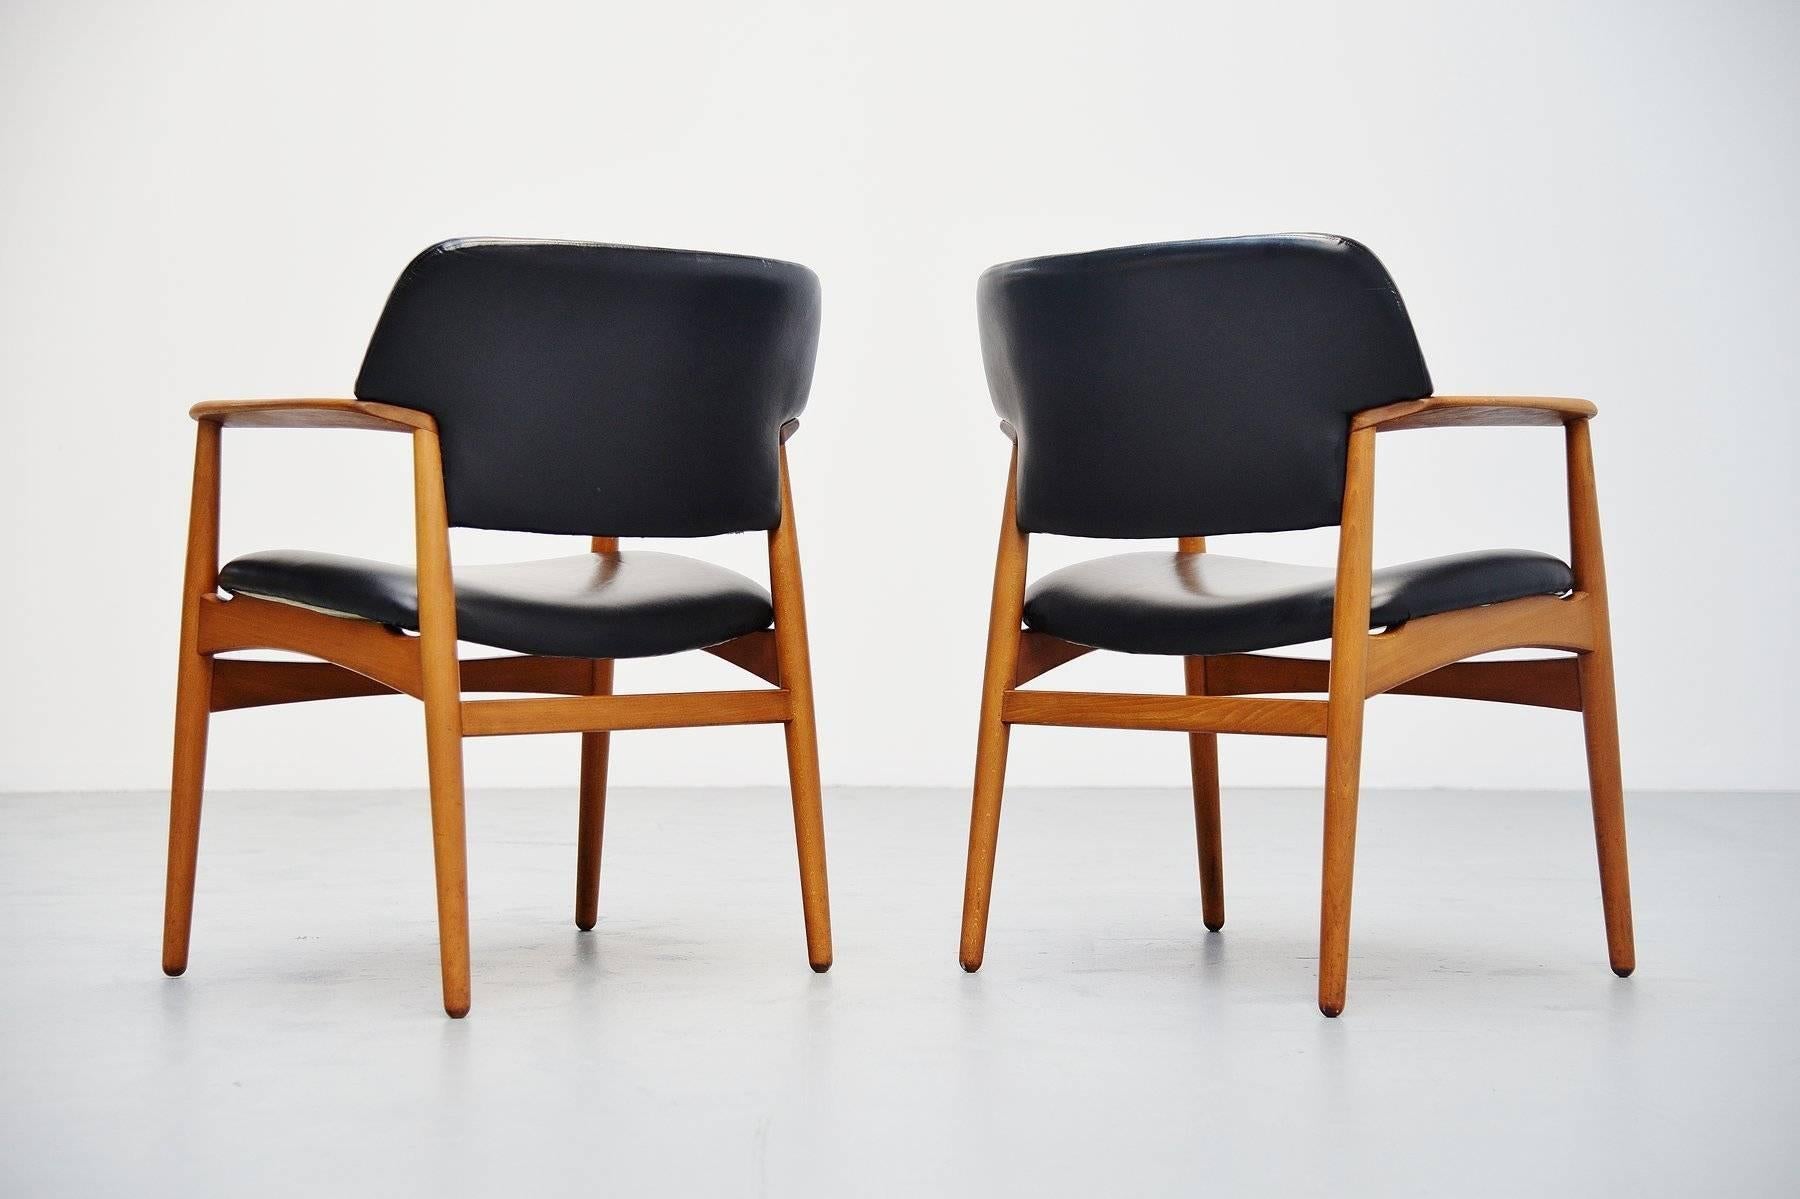 Very nice pair of armchairs model 4205 designed by Ejnar Larsen & Aksel Bender Madsen for Fritz Hansen, Denmark, 1955. These chairs have a solid birch wooden frame and black vinyl upholstery. The chairs are in excellent original condition and are